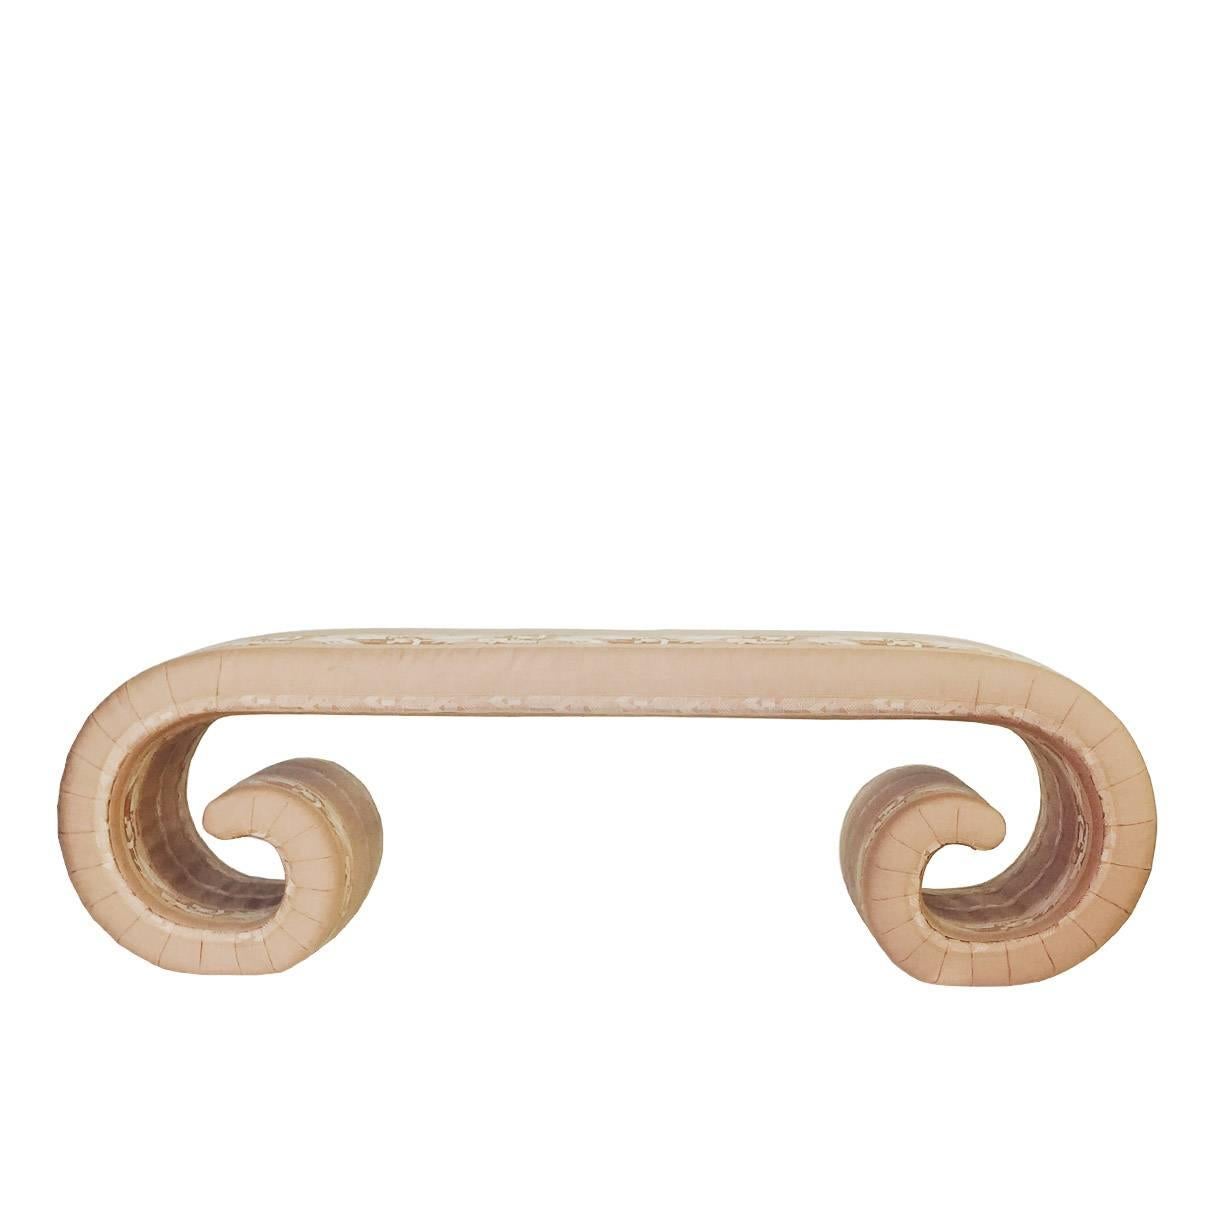 Upholstered scroll bench.

Dimensions: 60